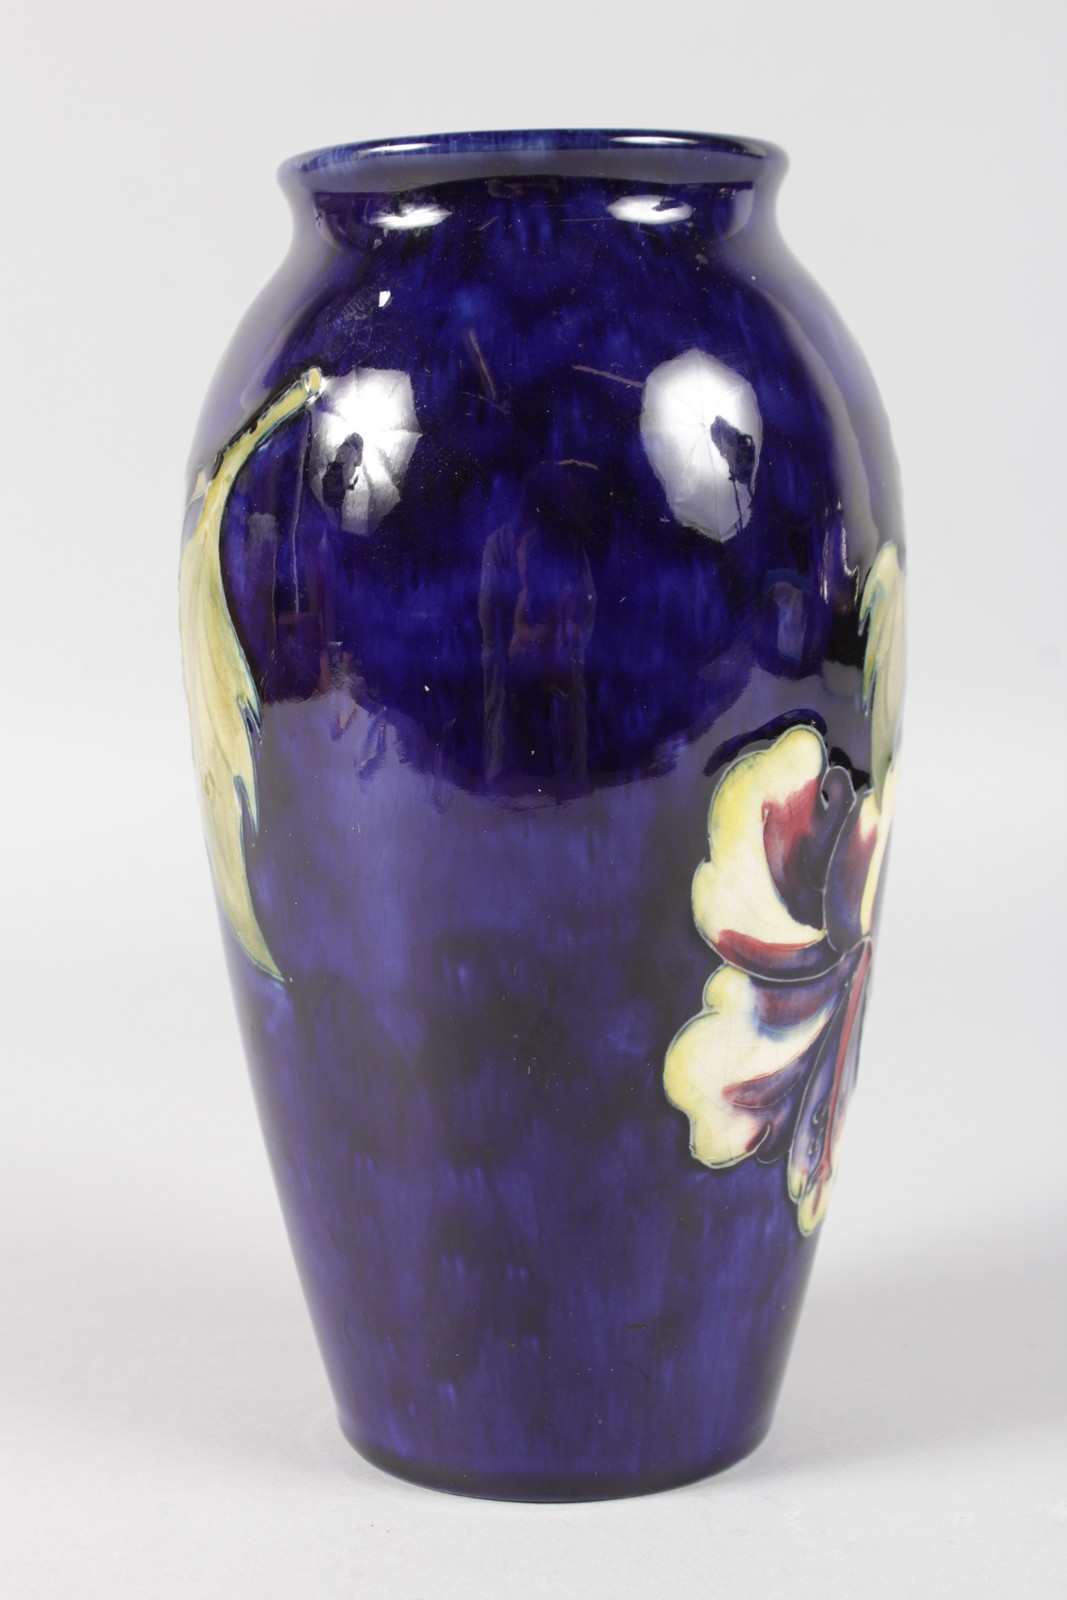 A MOORCROFT HIBISCUS PATTERNED VASE. Impressed MOORCROFT with printed label. 7.5ins high. - Image 2 of 6